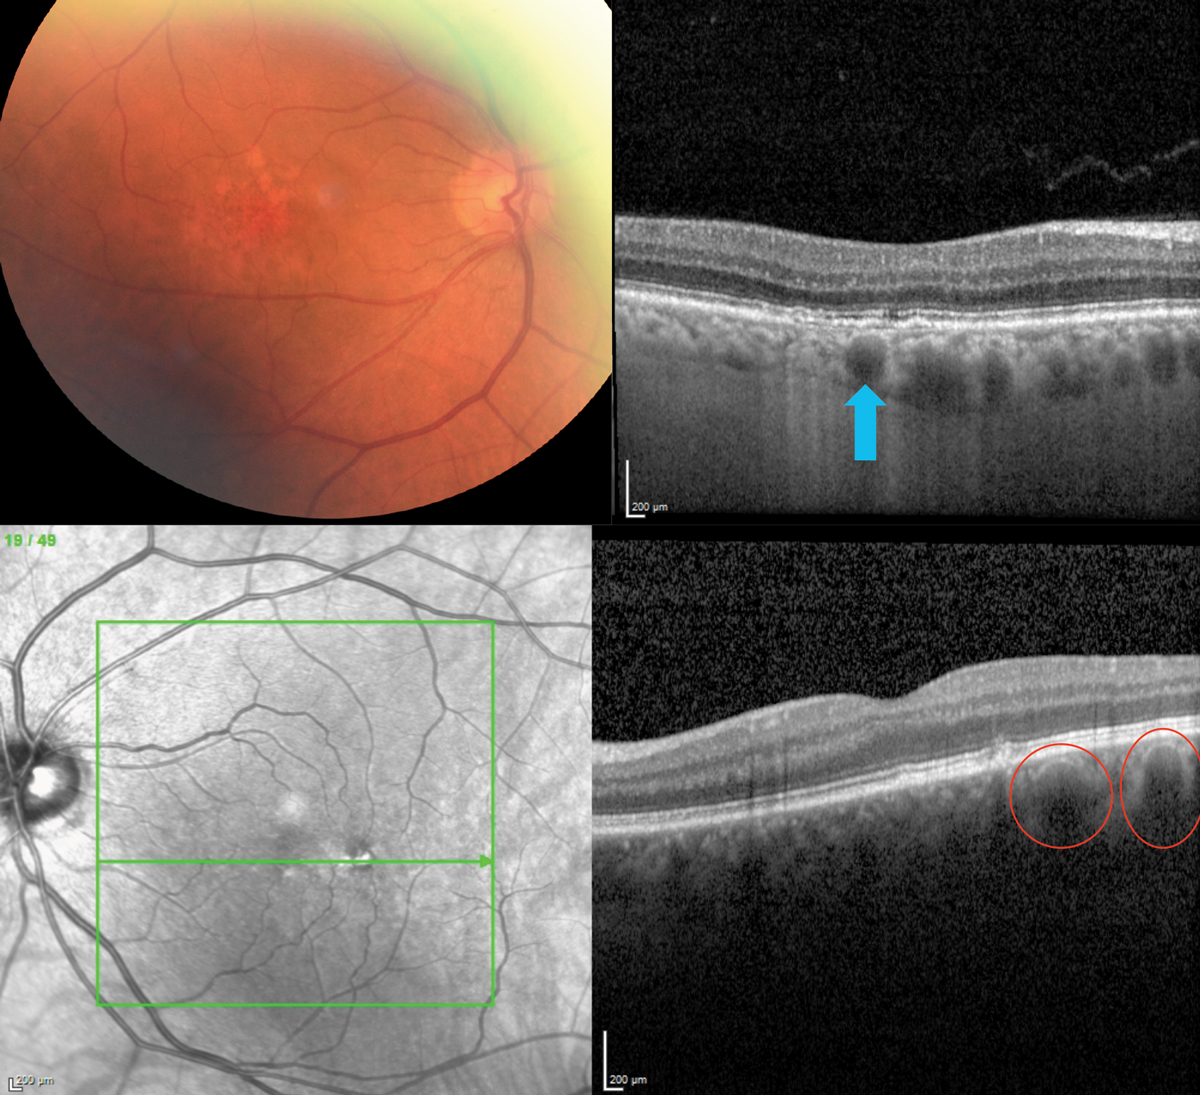 Choroidal vascularity index could have prognostic utility in AMD.